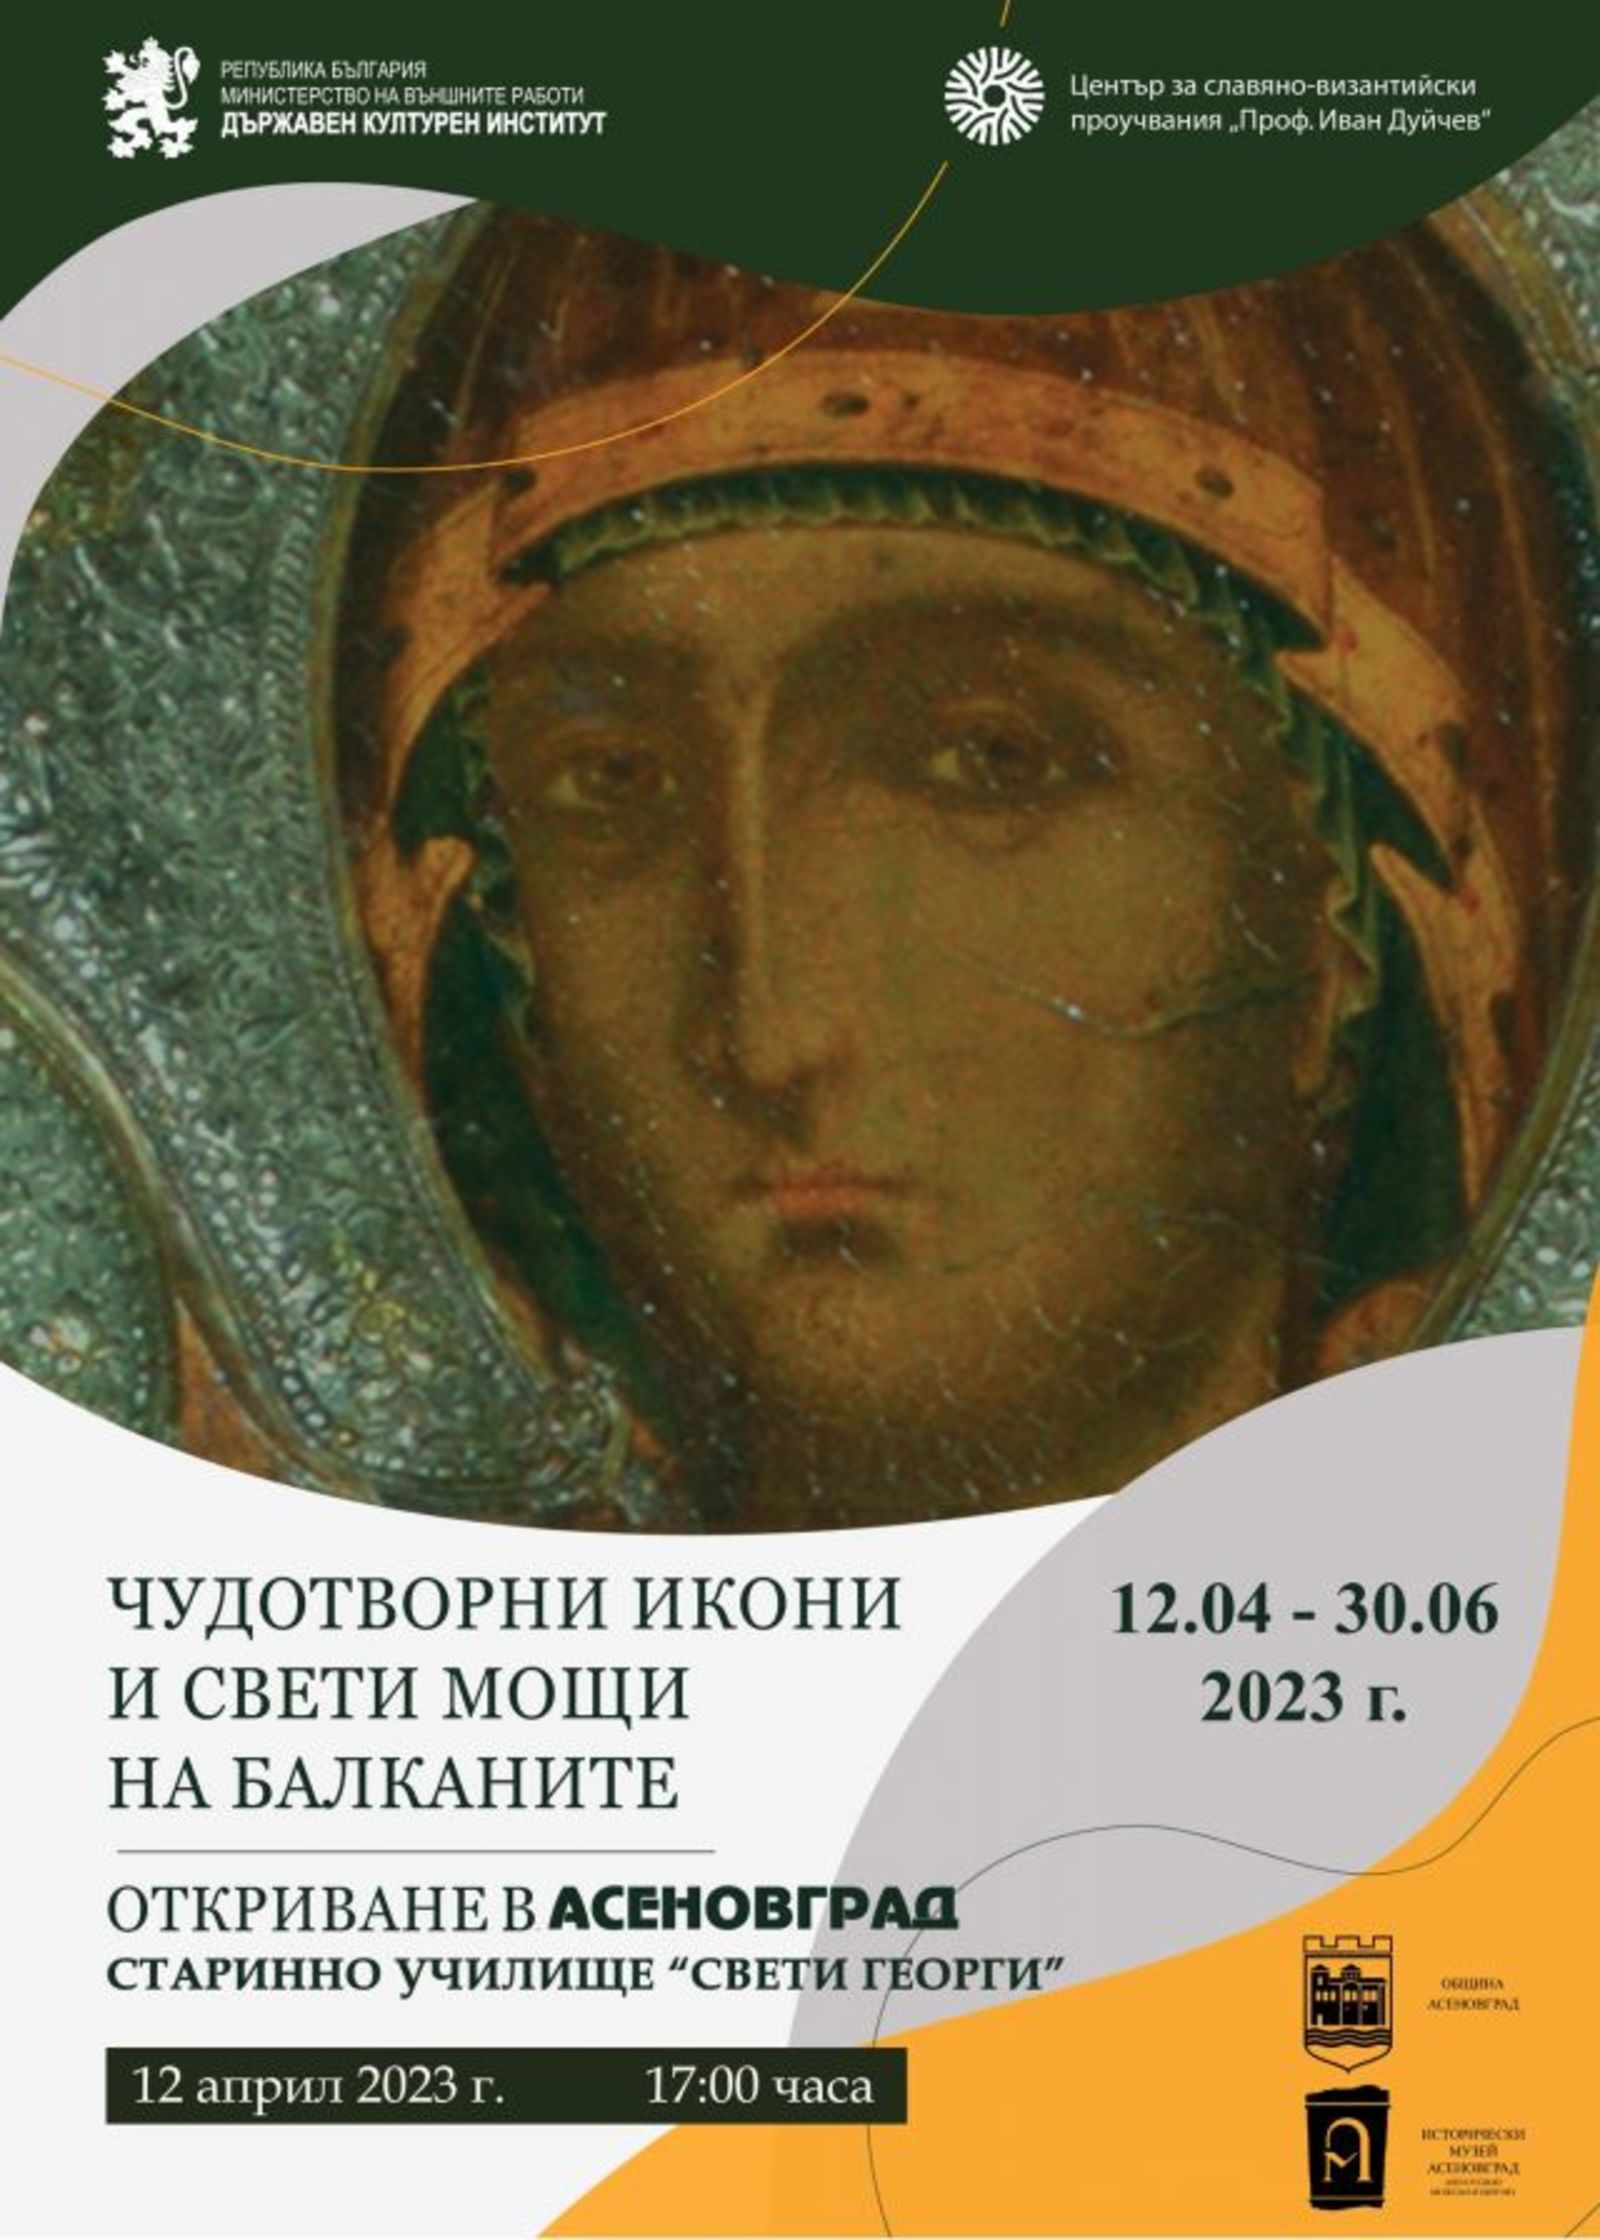 The Exhibition "Miraculous Icons and Holy Relics of the Balkans" will be Opened in Asenovgrad